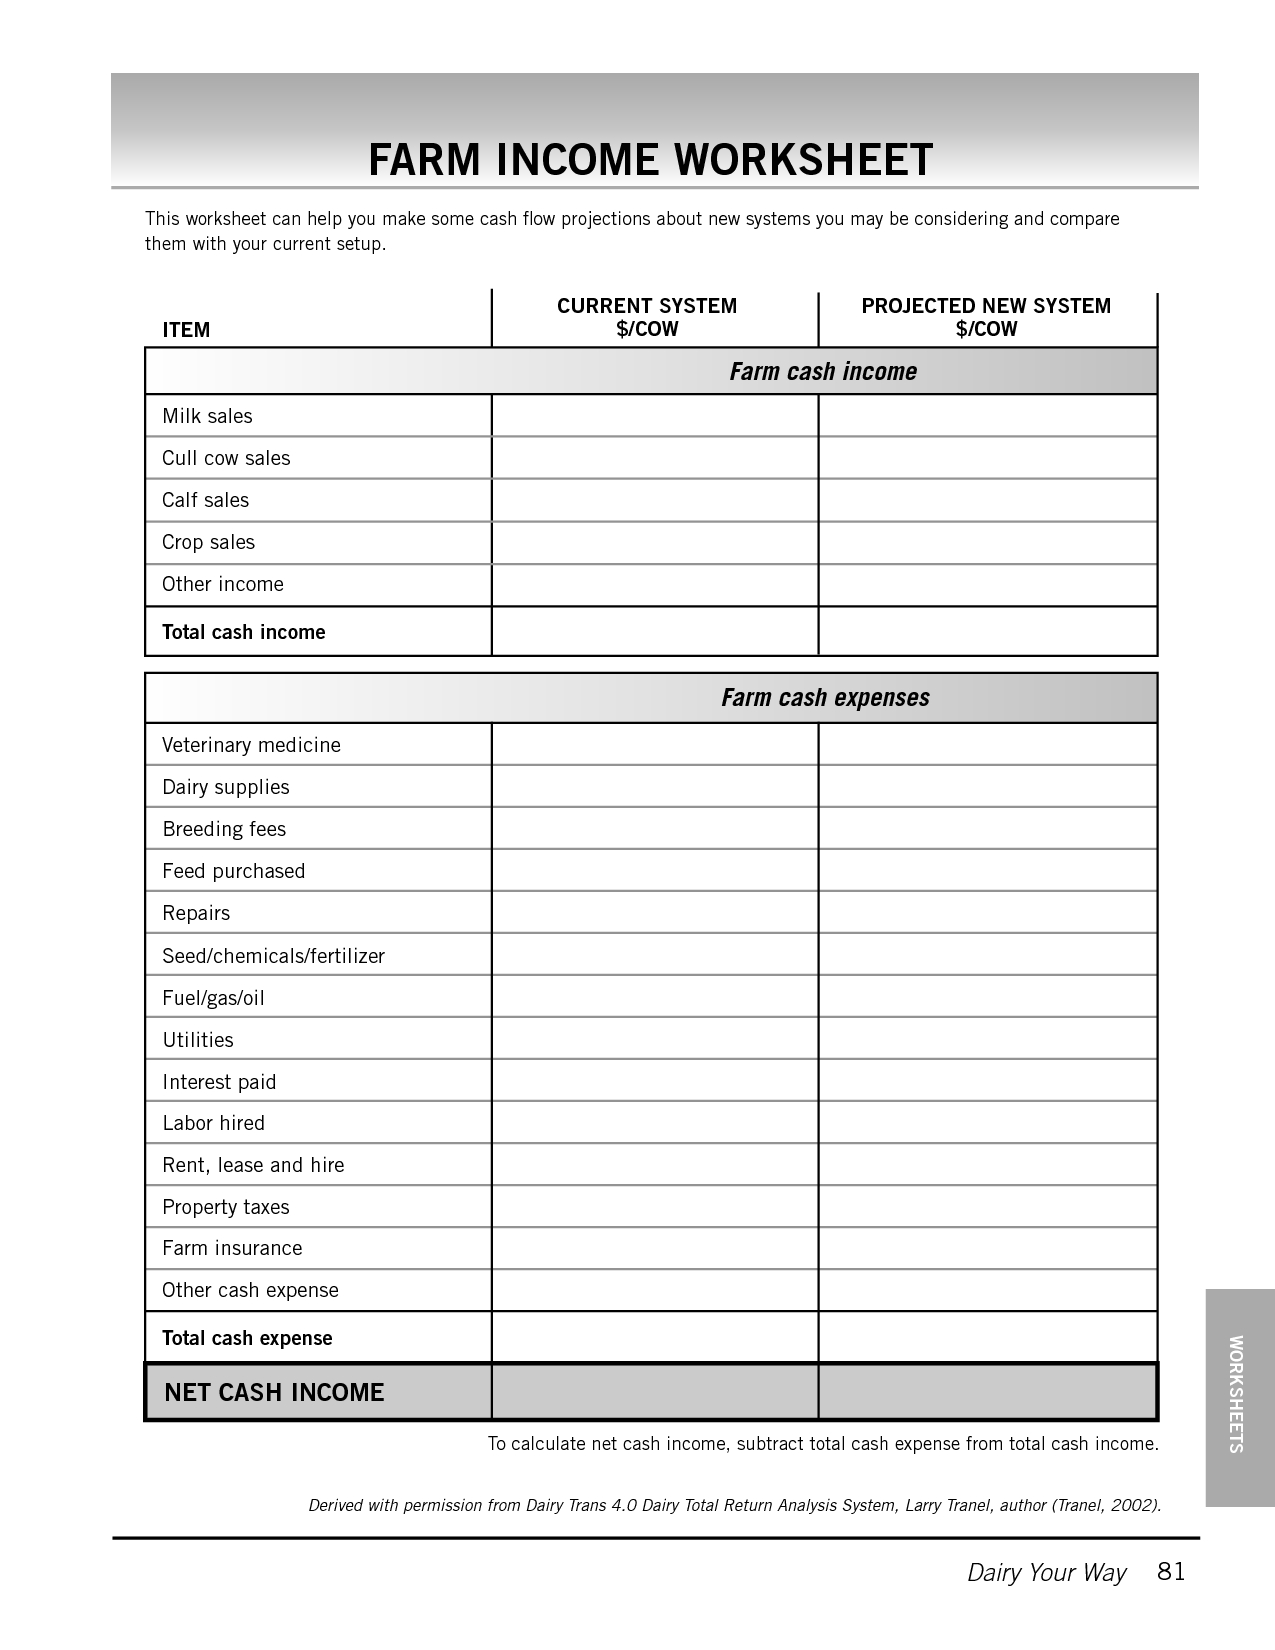 Cattle Expense Spreadsheet With Sheet Cattleudget Spreadsheet Printable Income And Expense Worksheet